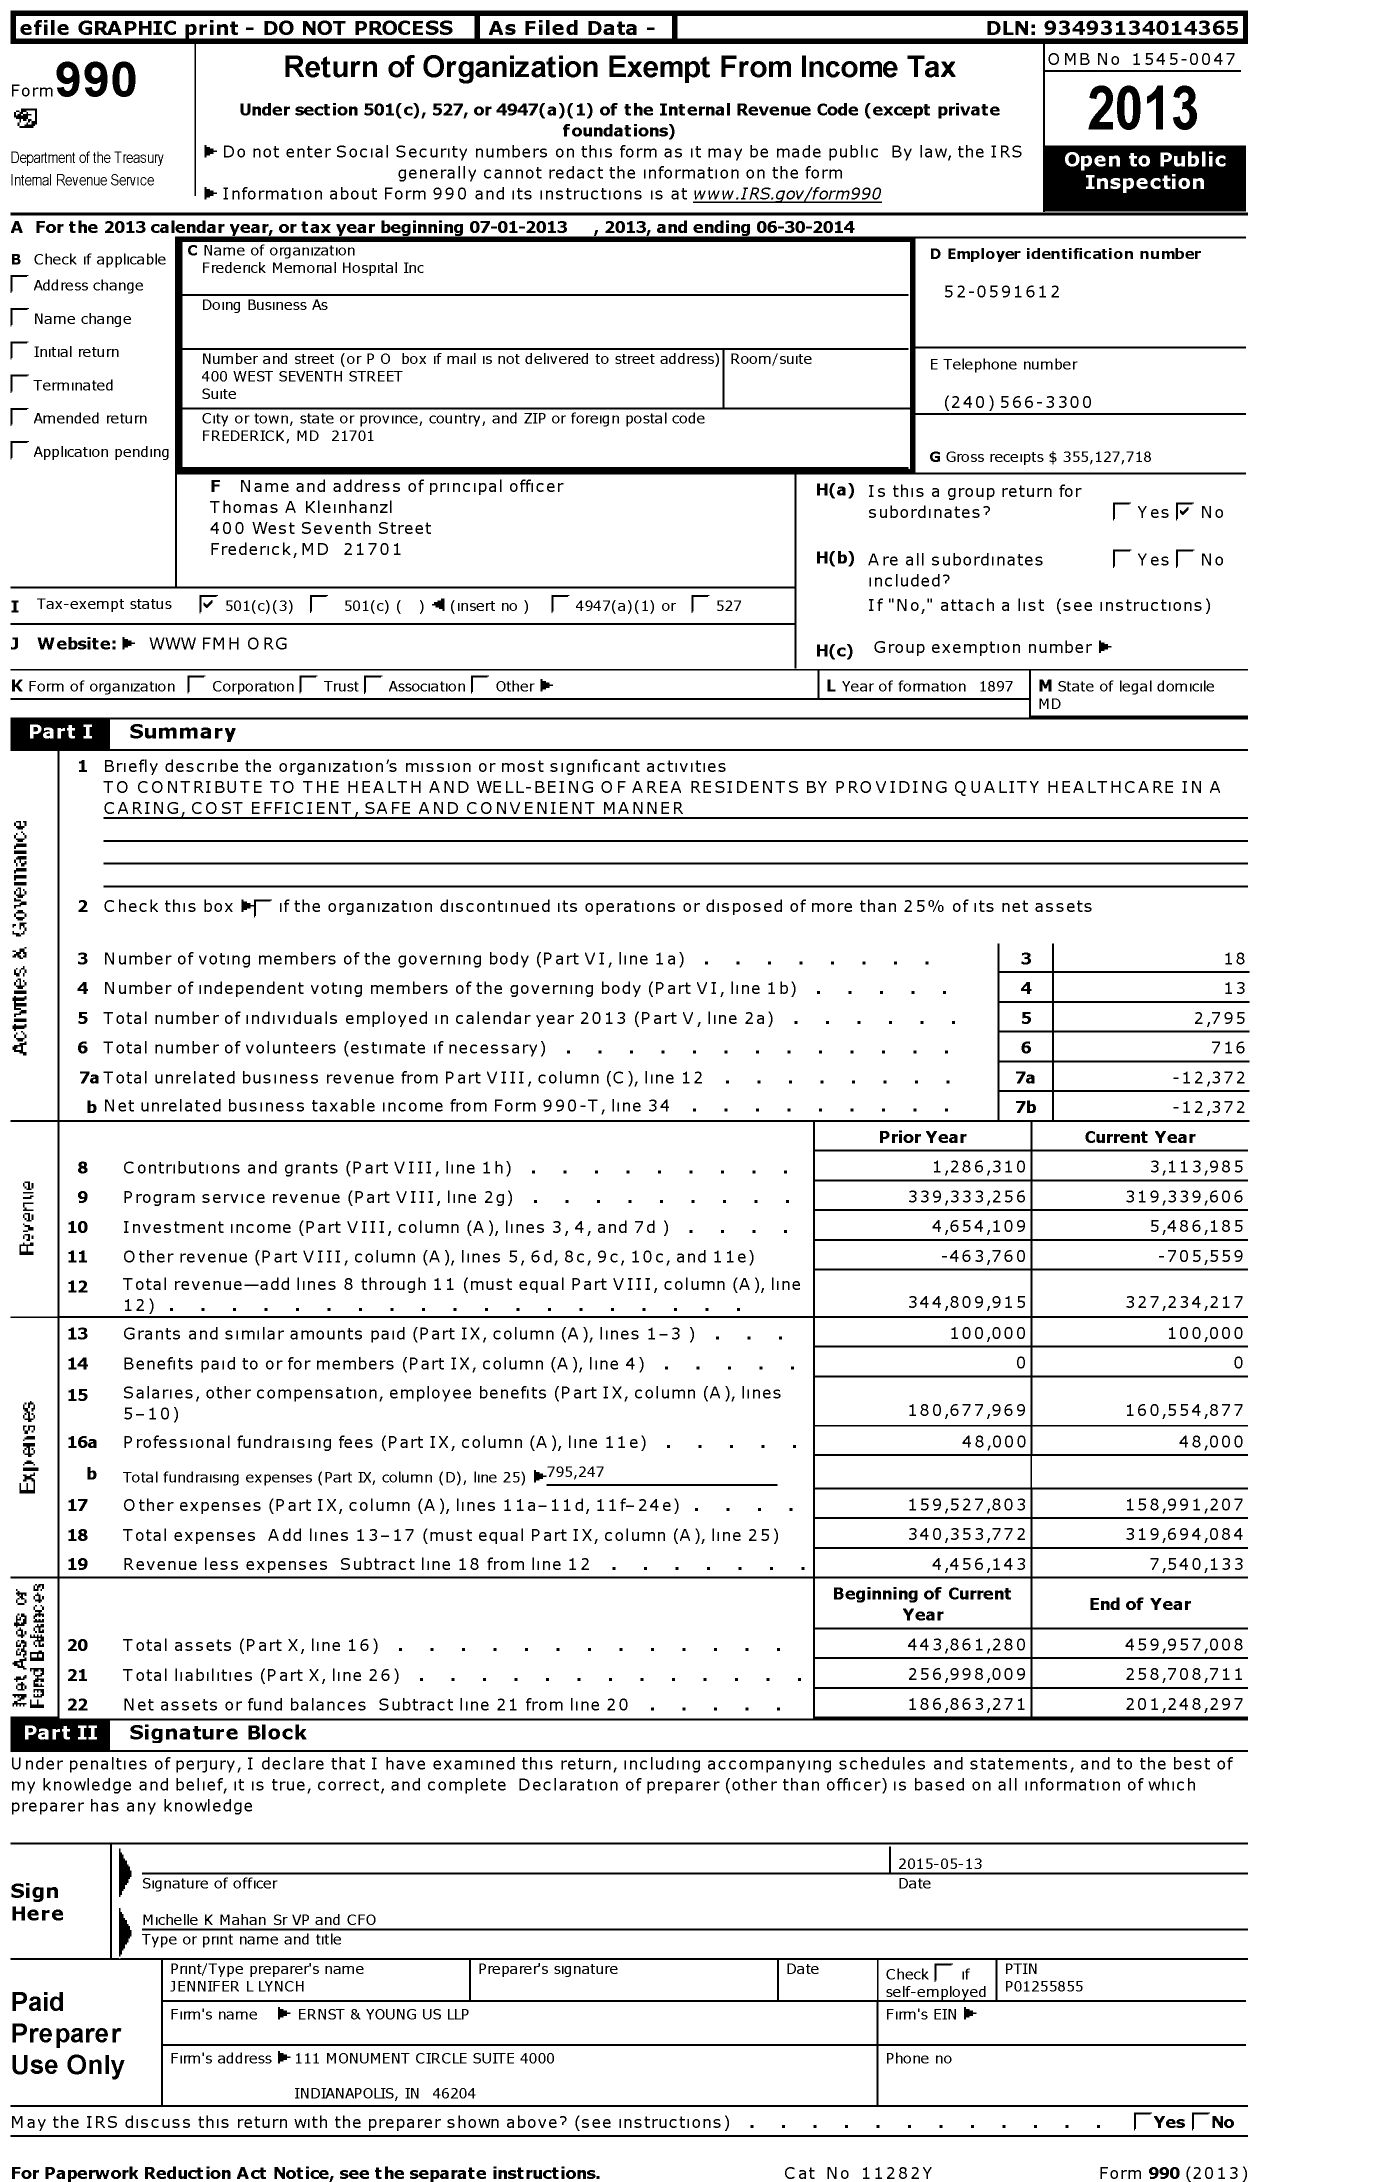 Image of first page of 2013 Form 990 for Frederick Health Hospital (FMH)